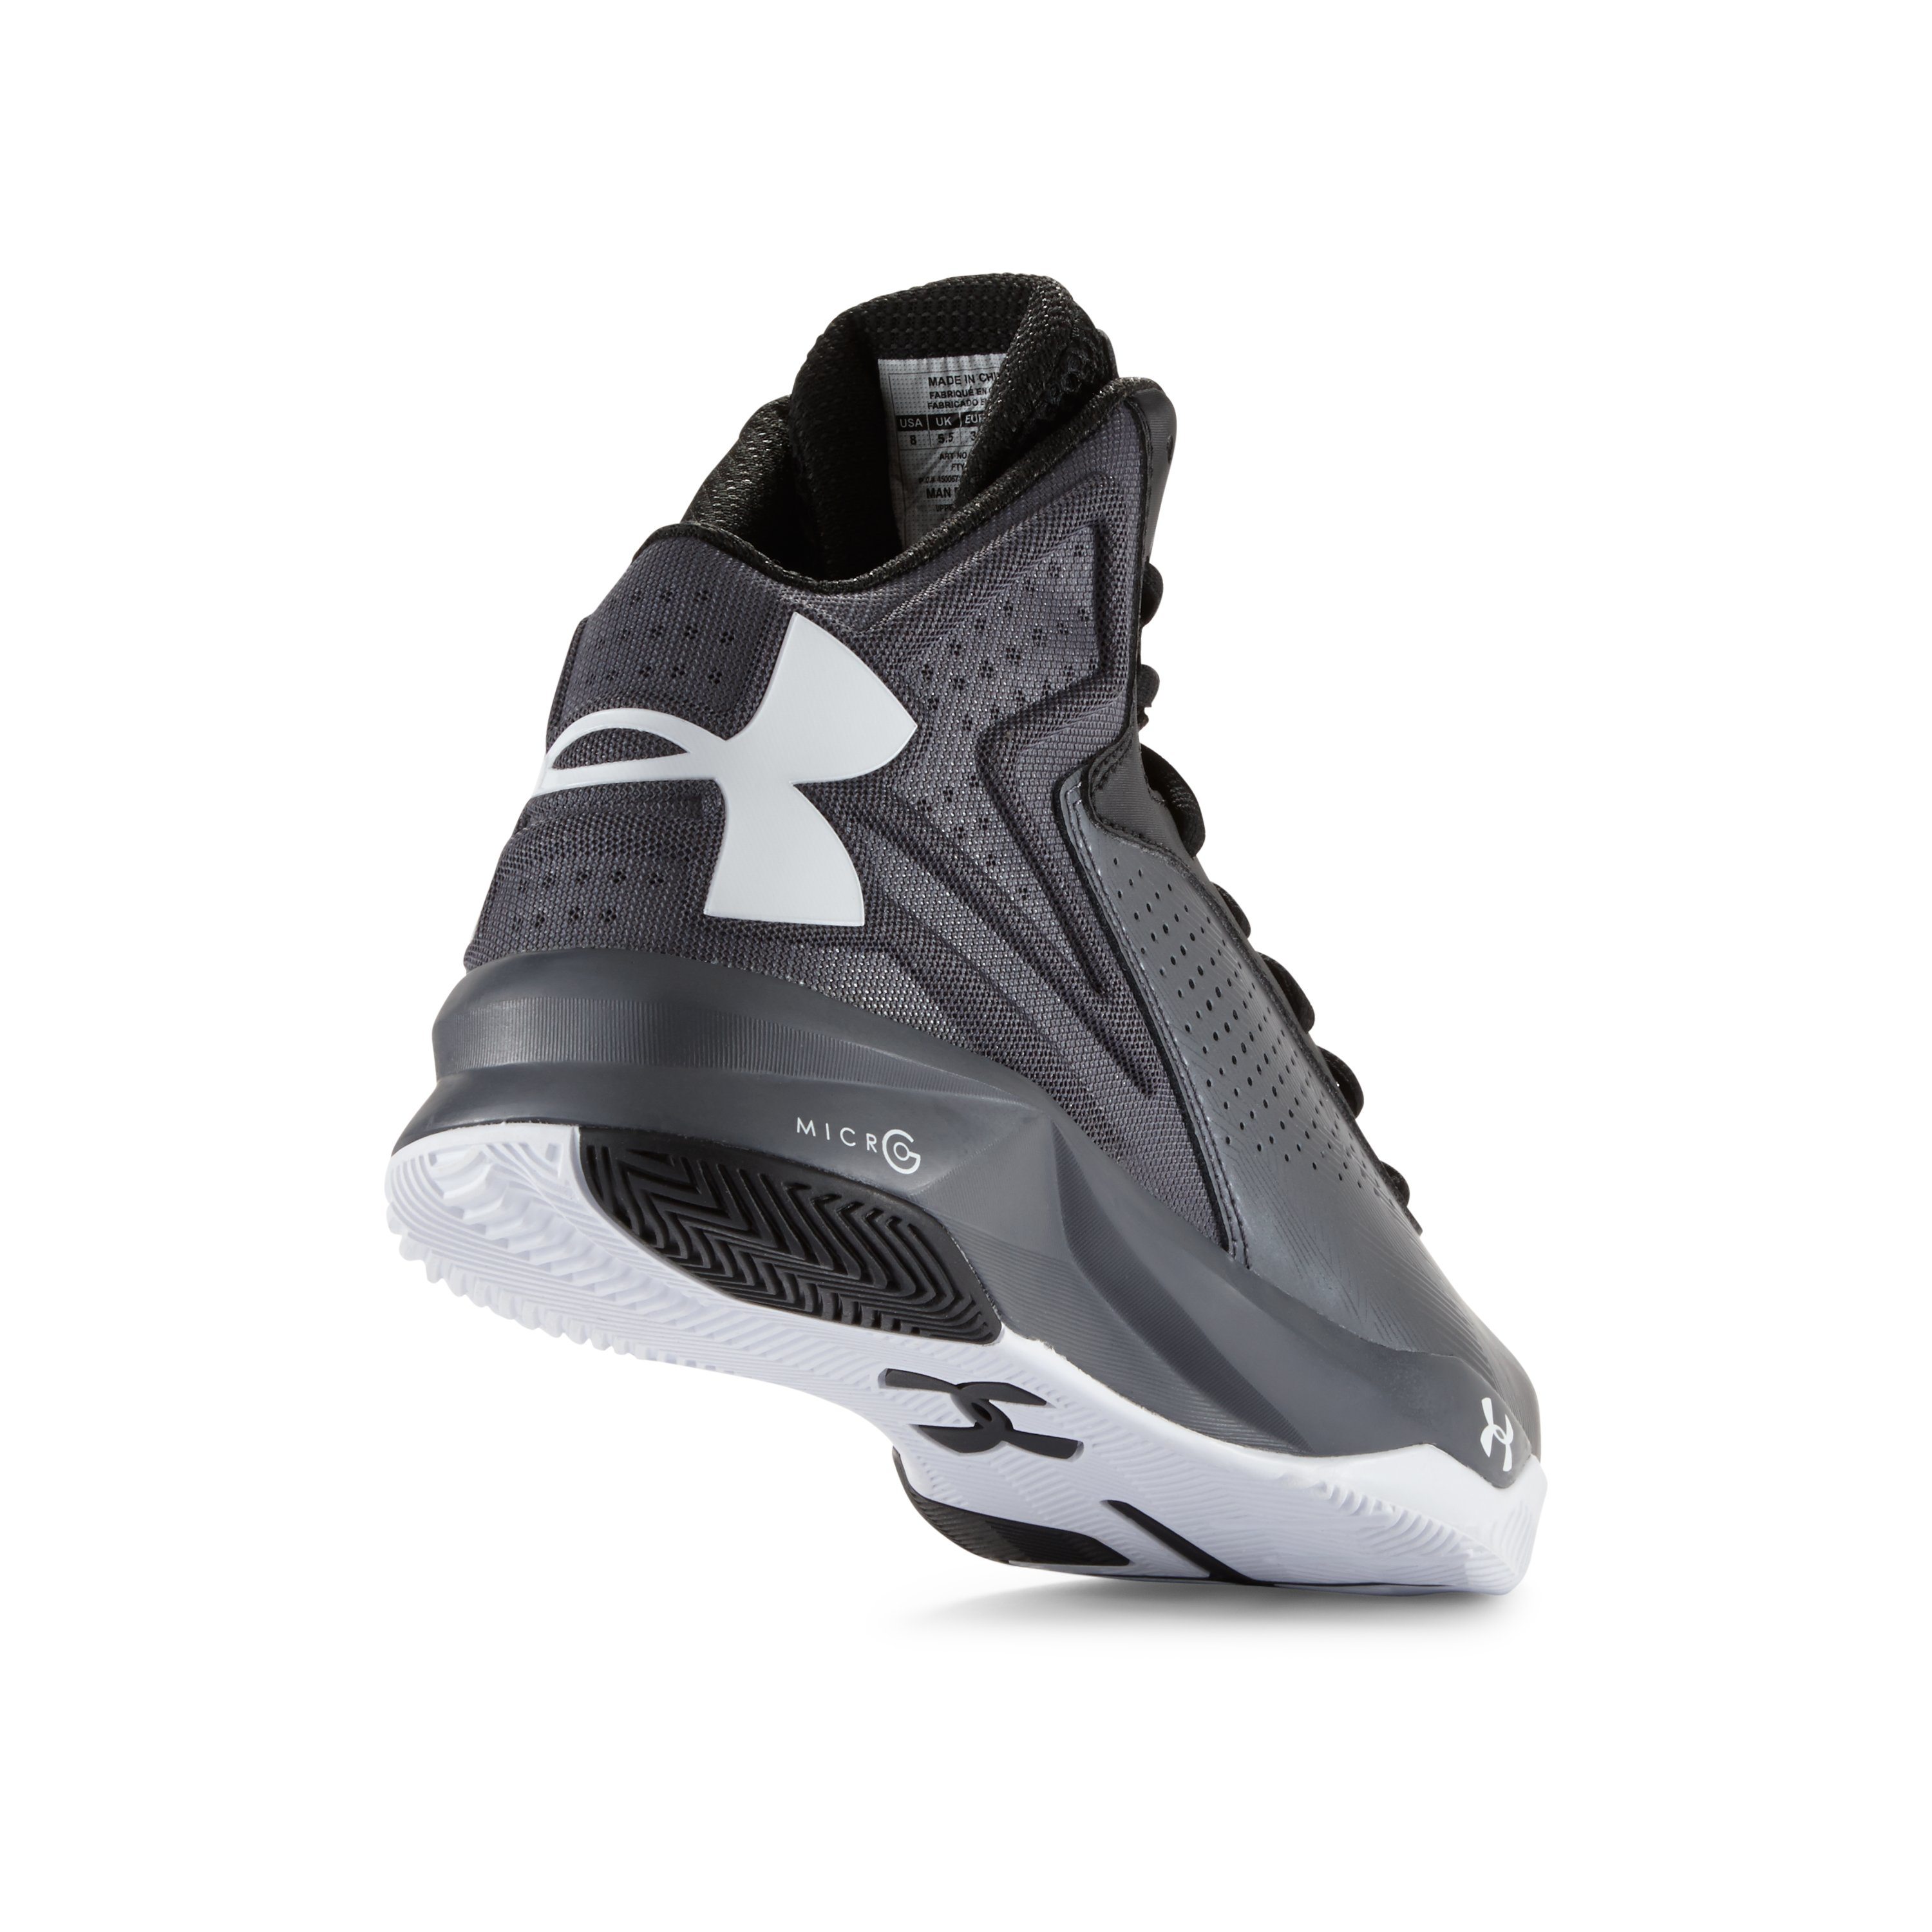 Under Armour Women's Ua Micro G® Torch Basketball Shoes - Lyst